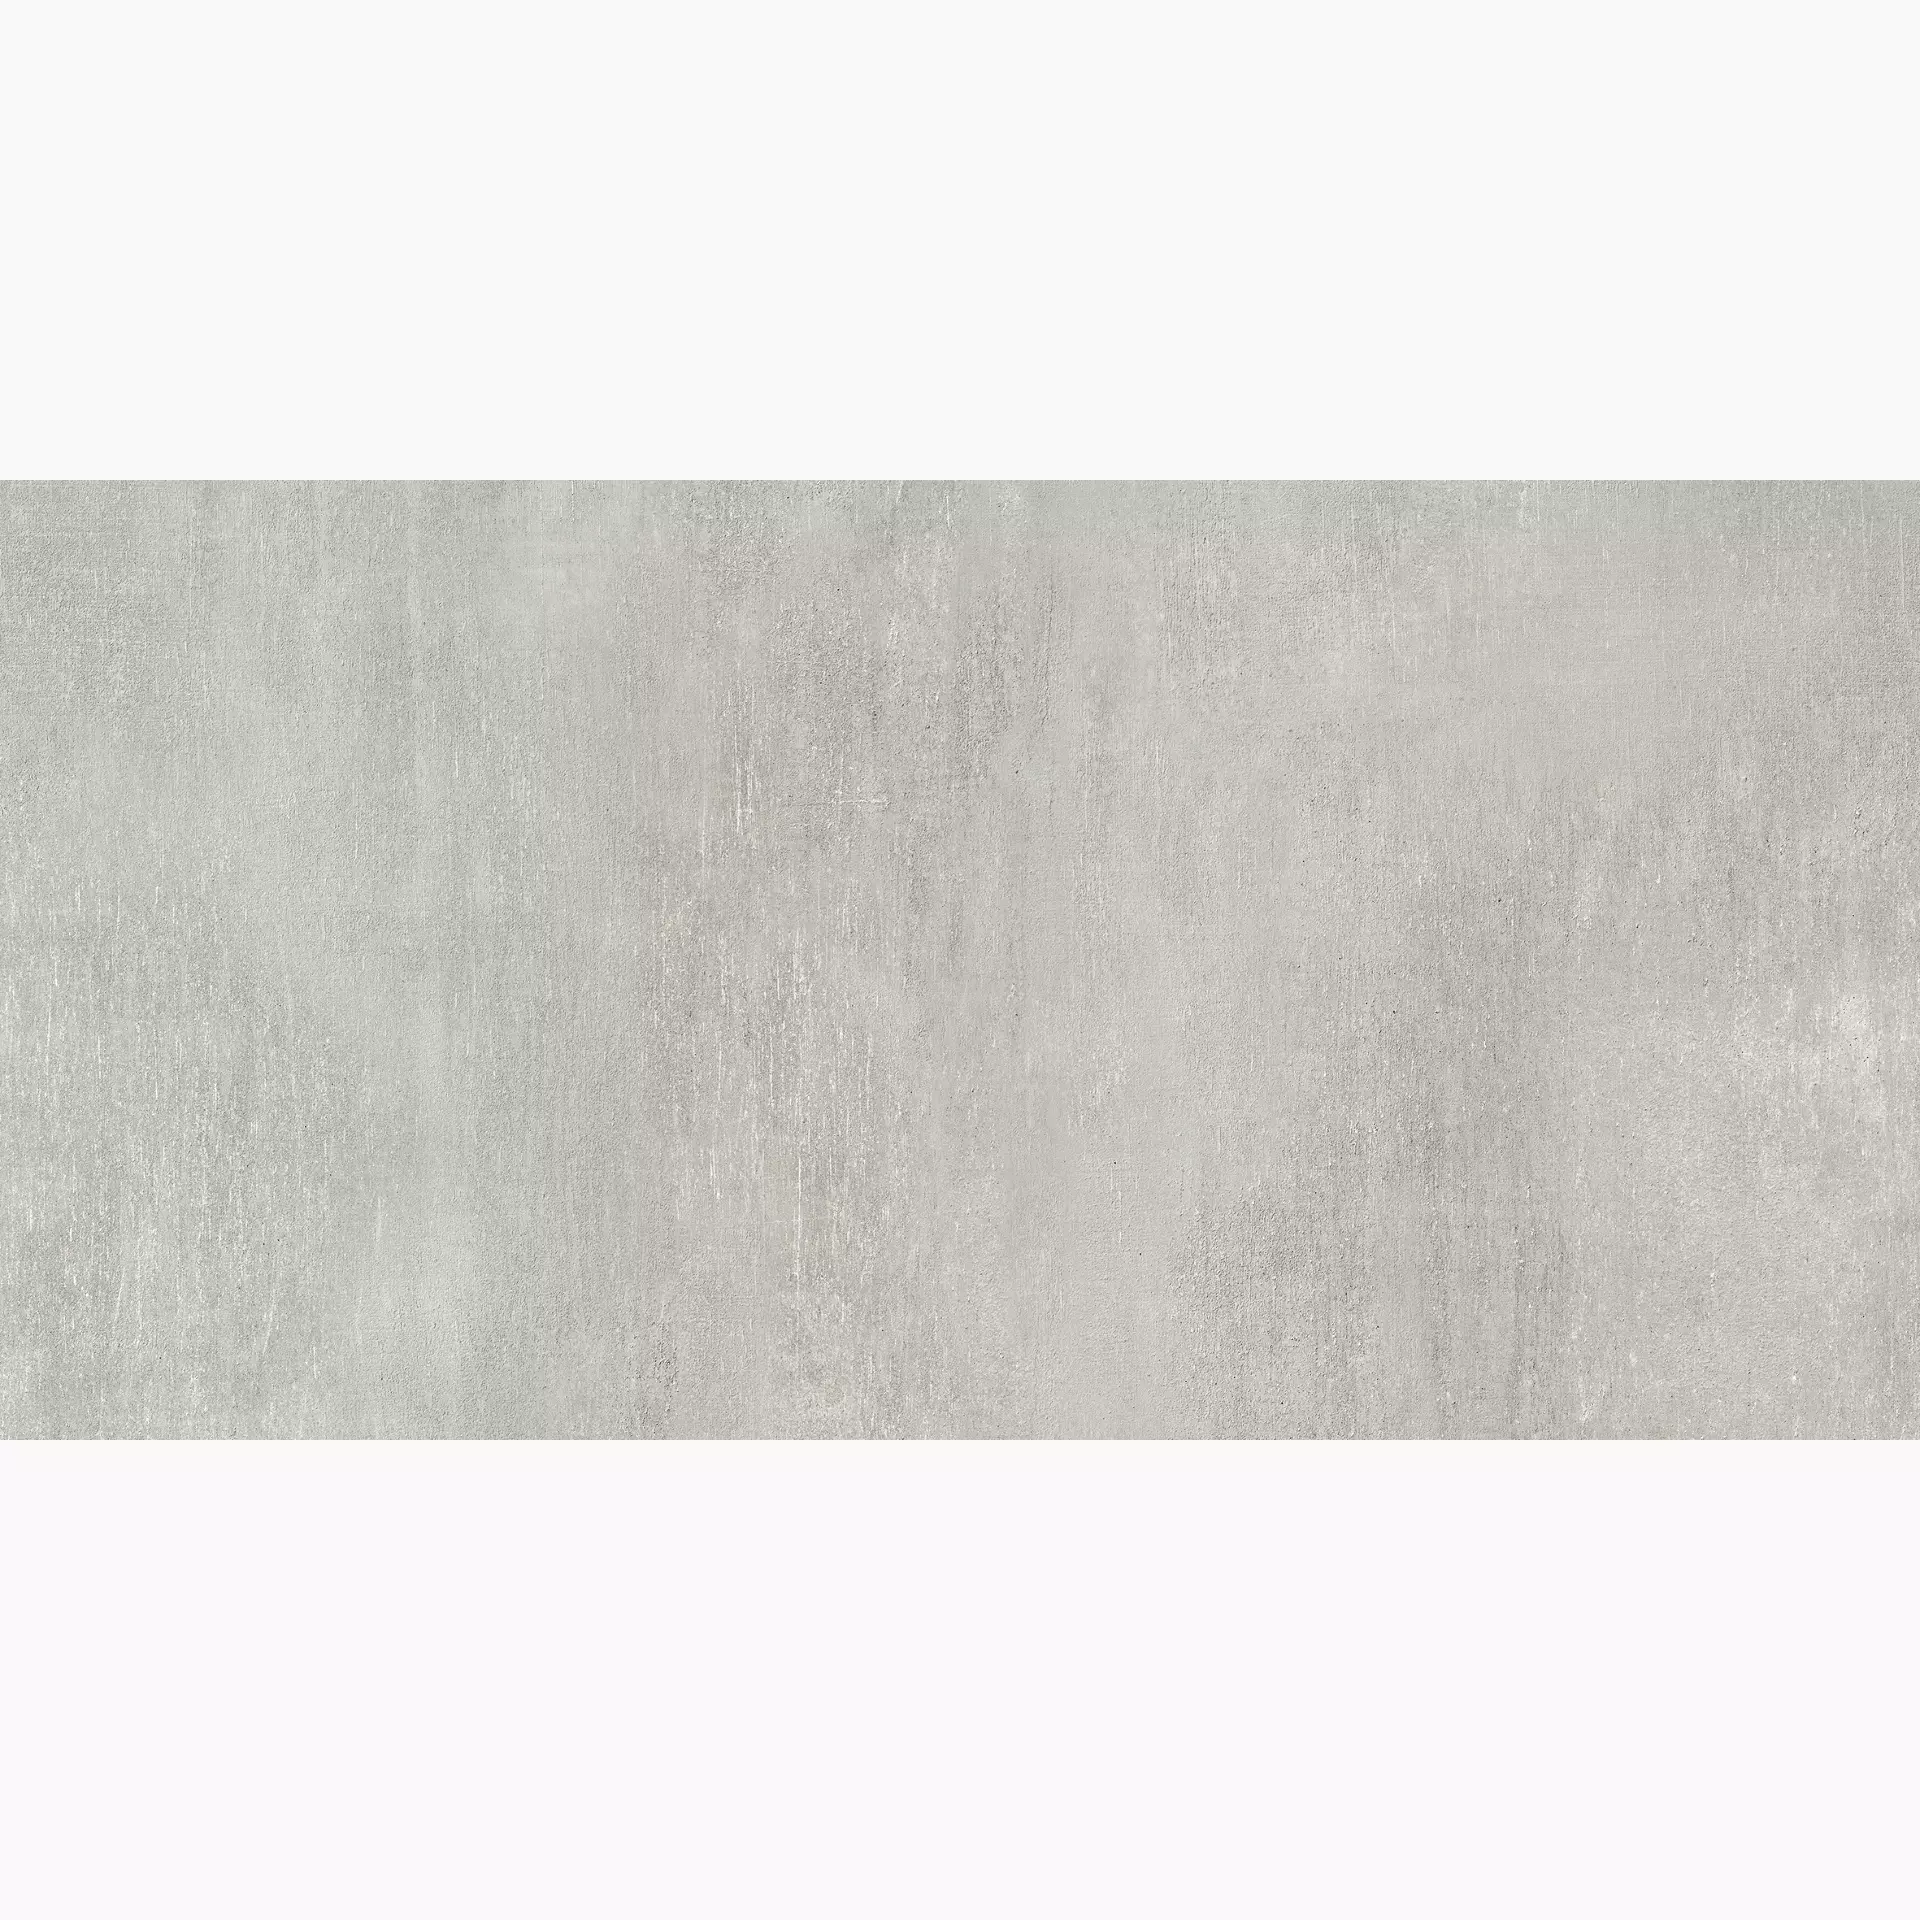 MGM Industrial Grey INDUGRE4080 40x80cm rectified 10mm